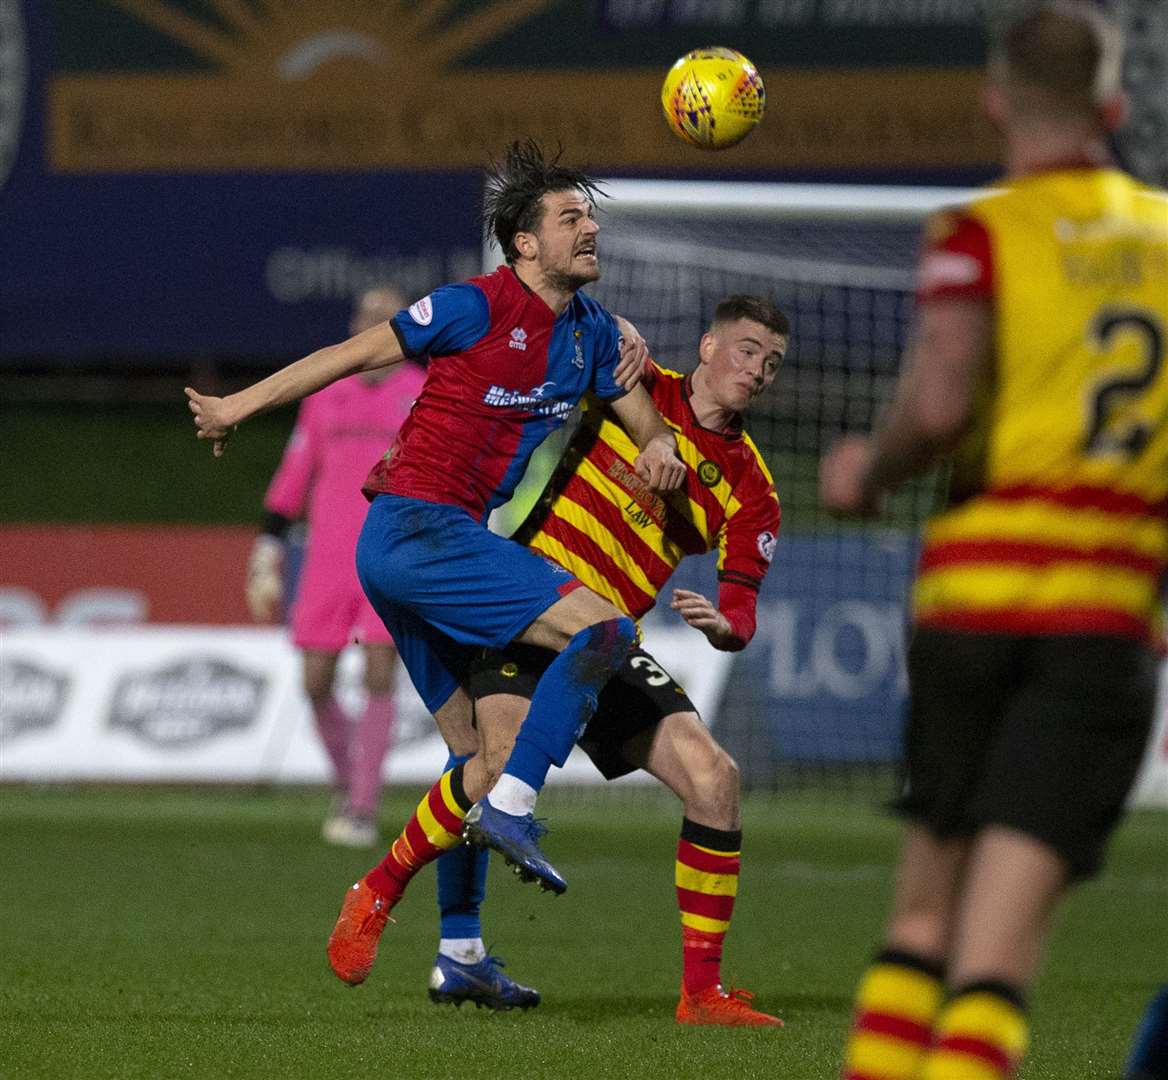 ICT's Charlie Trafford knocks the ball away from Partick's Lewis Mansell.